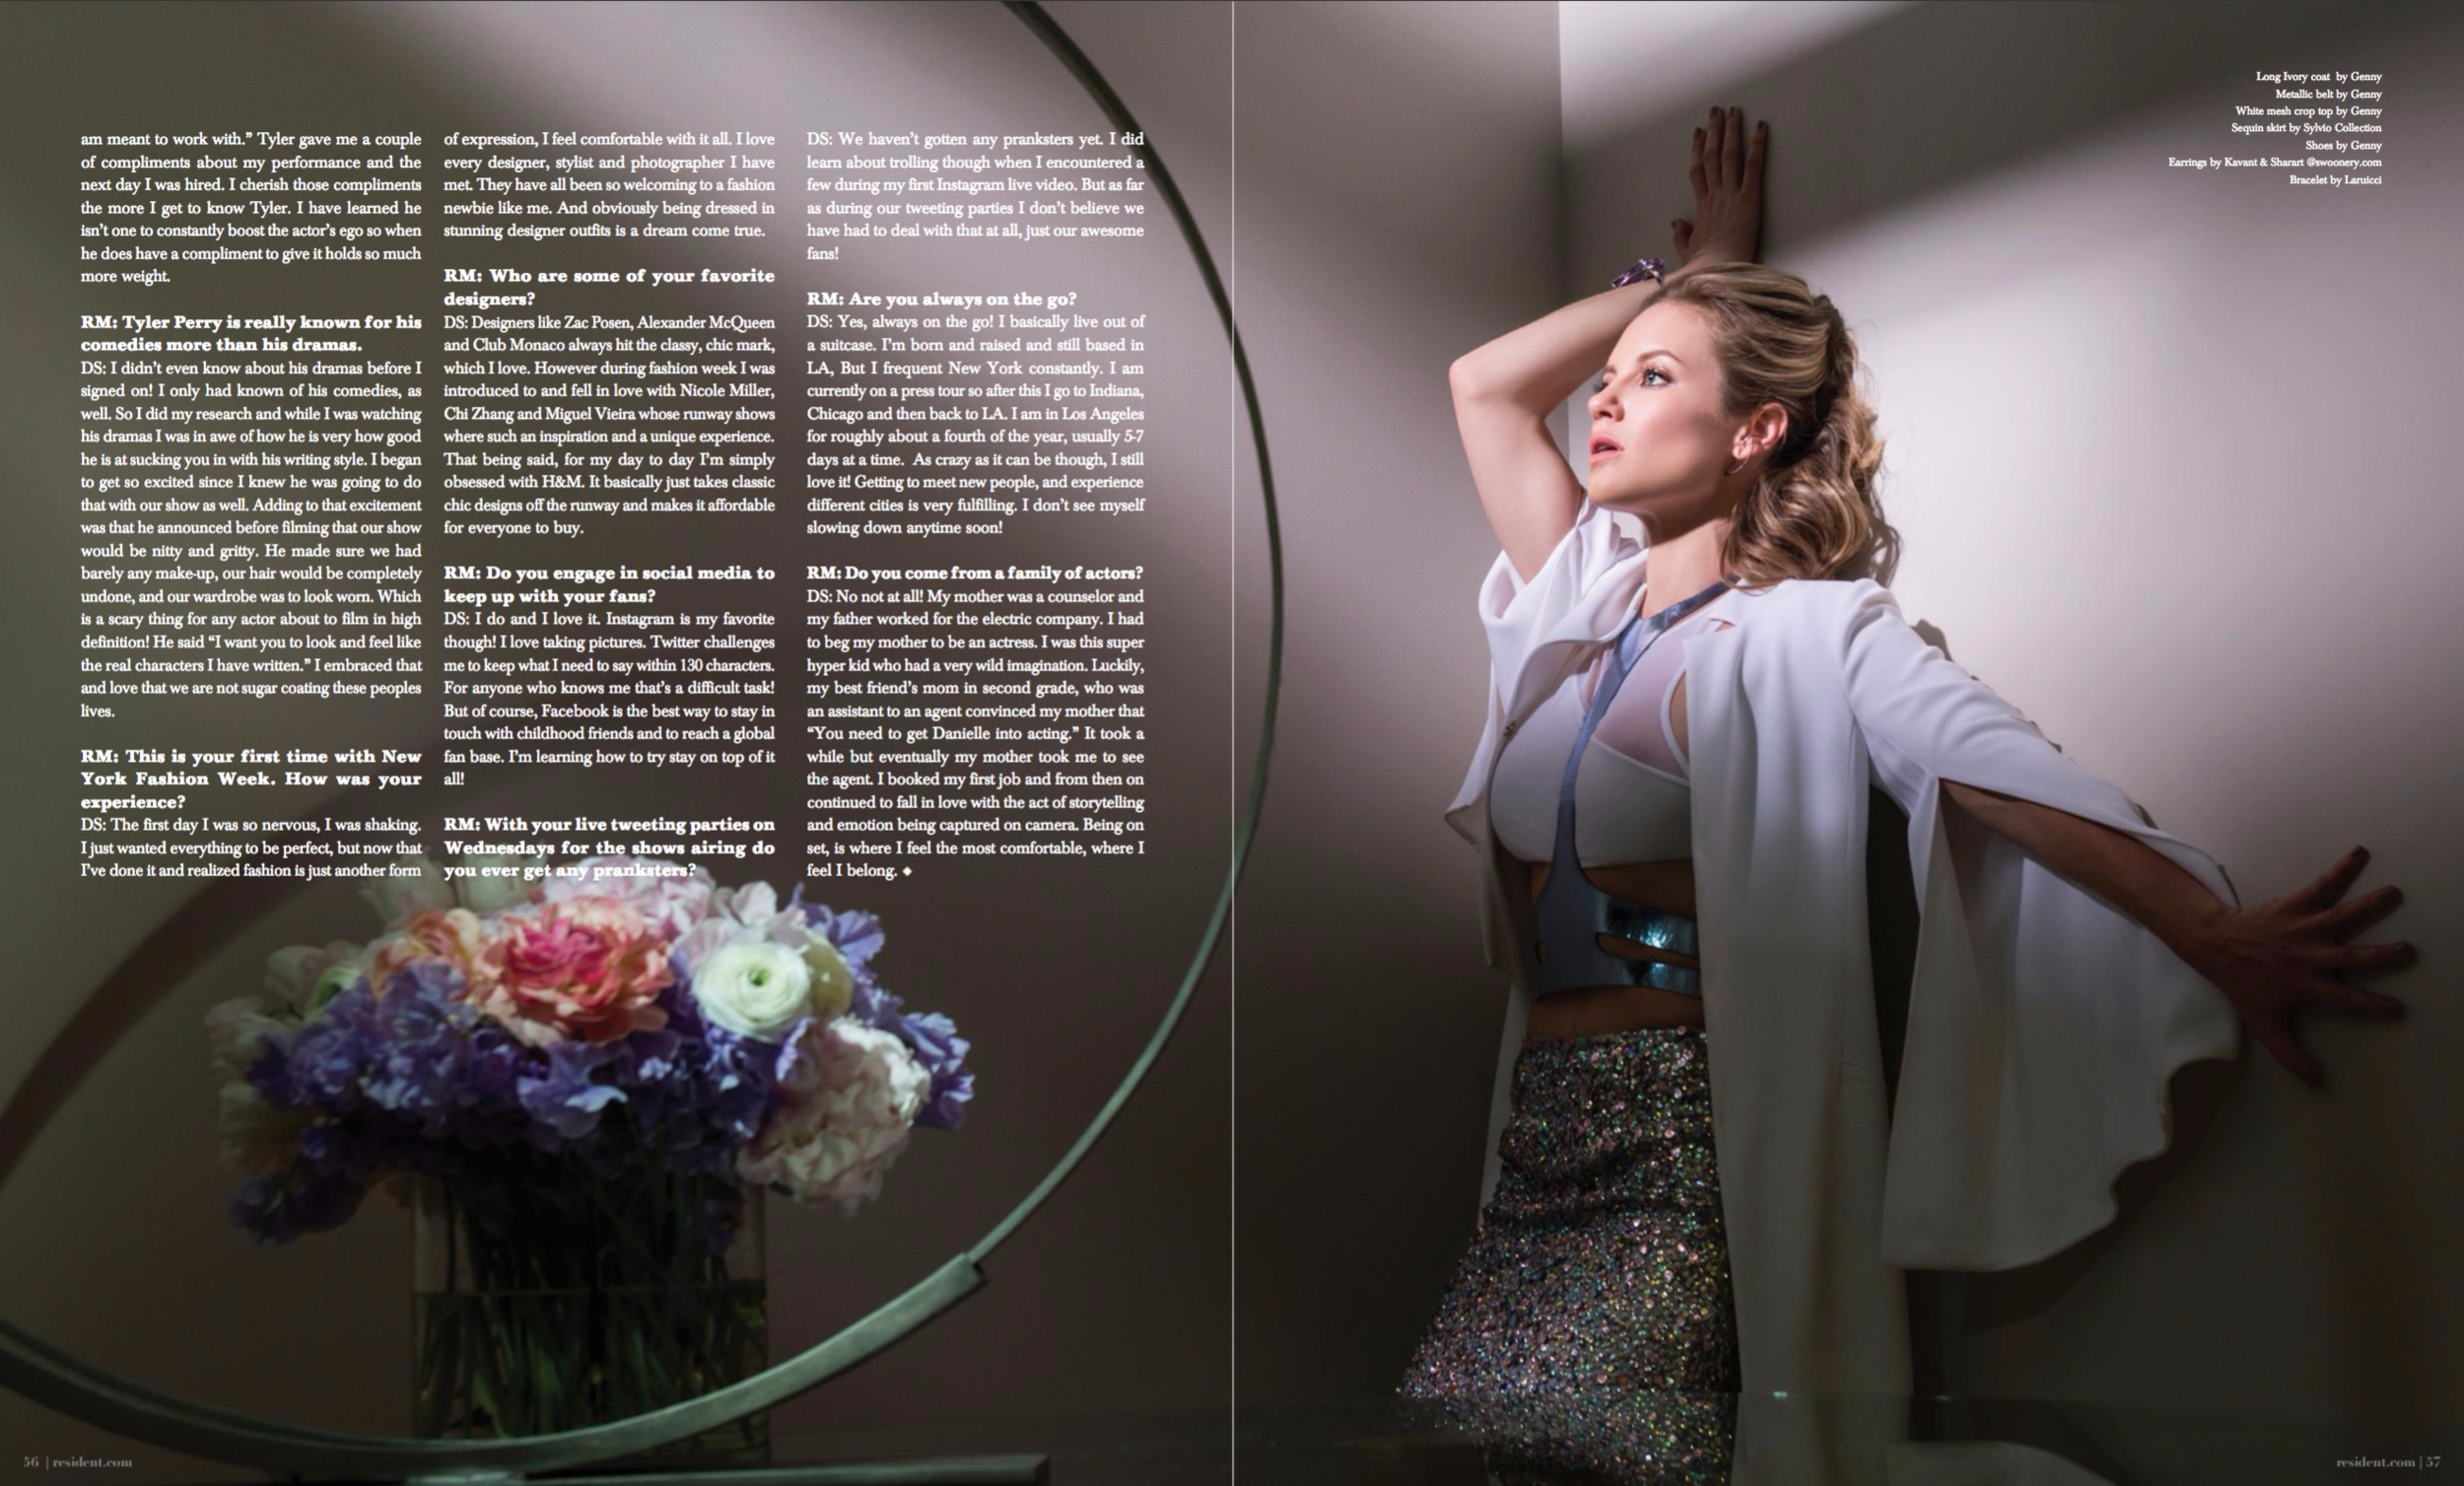 Danielle Savre by photographer Andrew Werner, Resident Magazine March 2017 - page 5 & 6.png